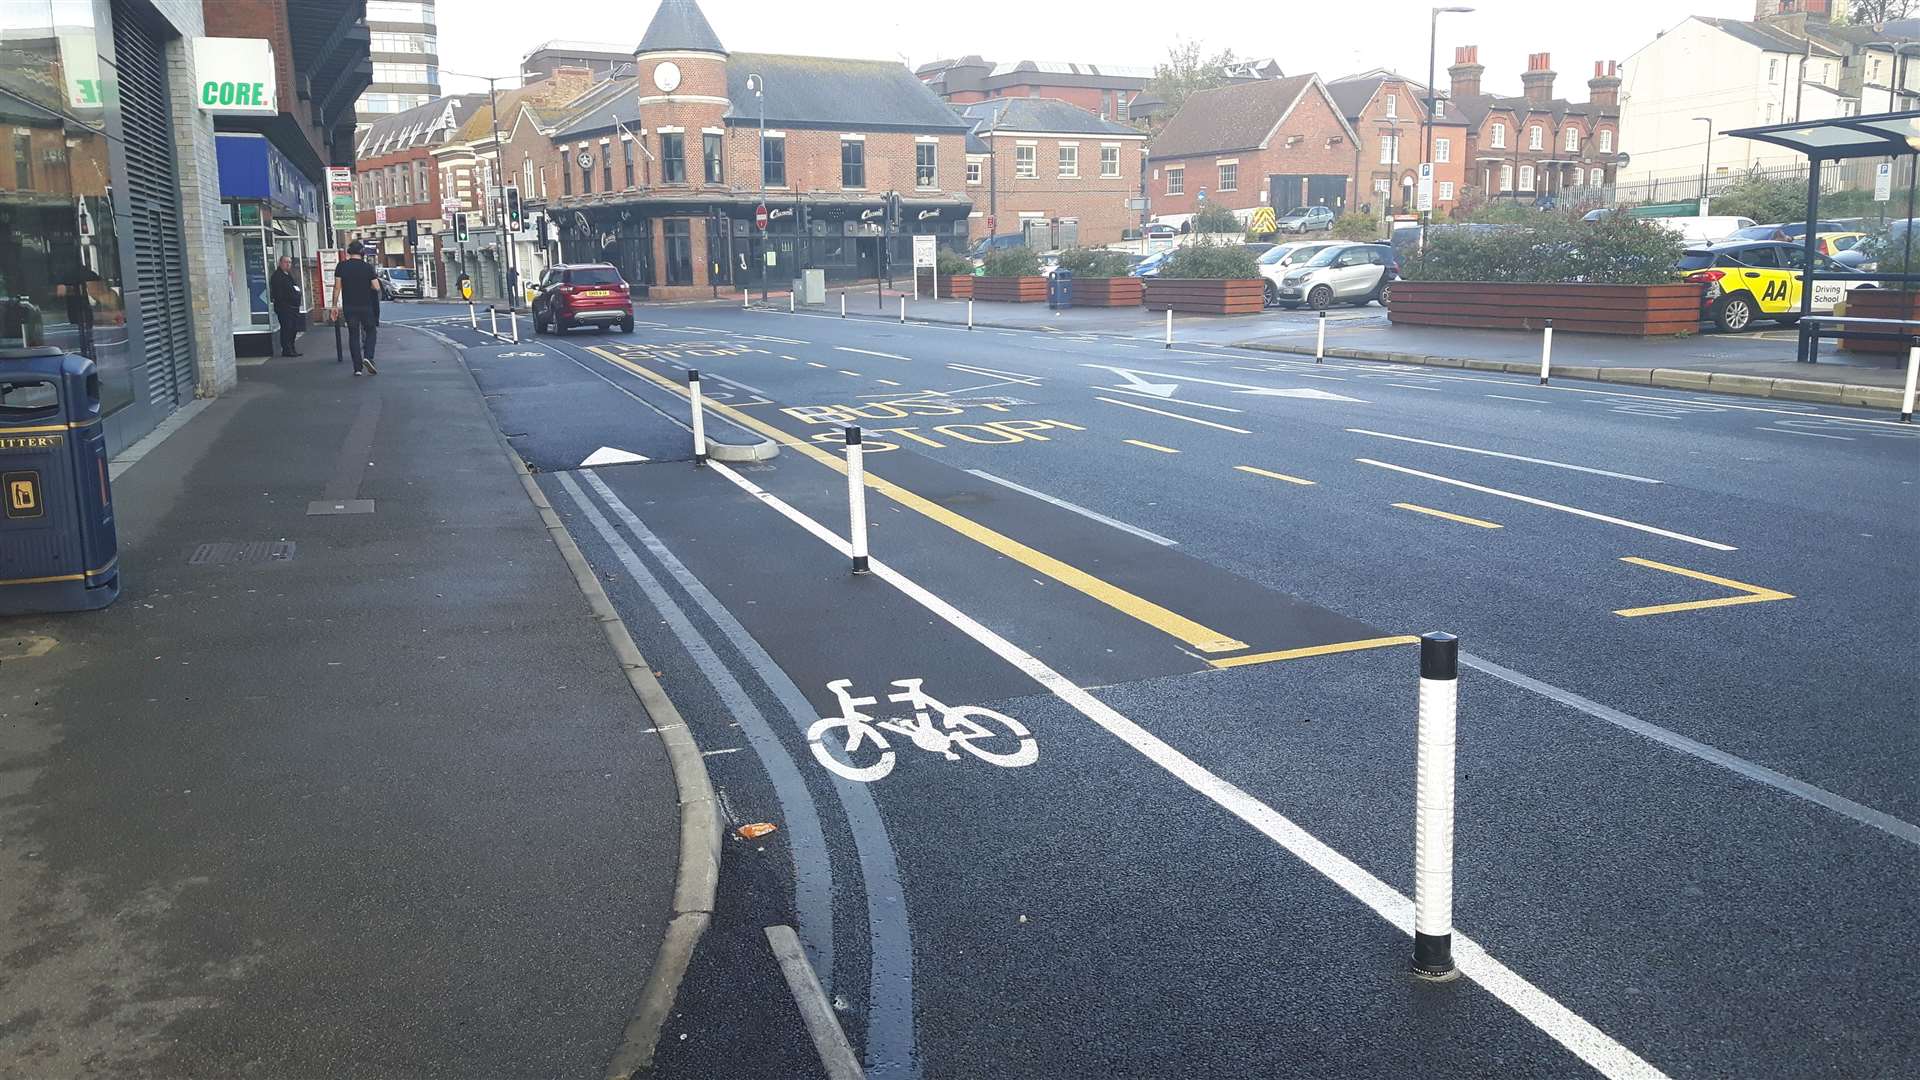 A pop-up cycle lanes in King Street, Maidstone